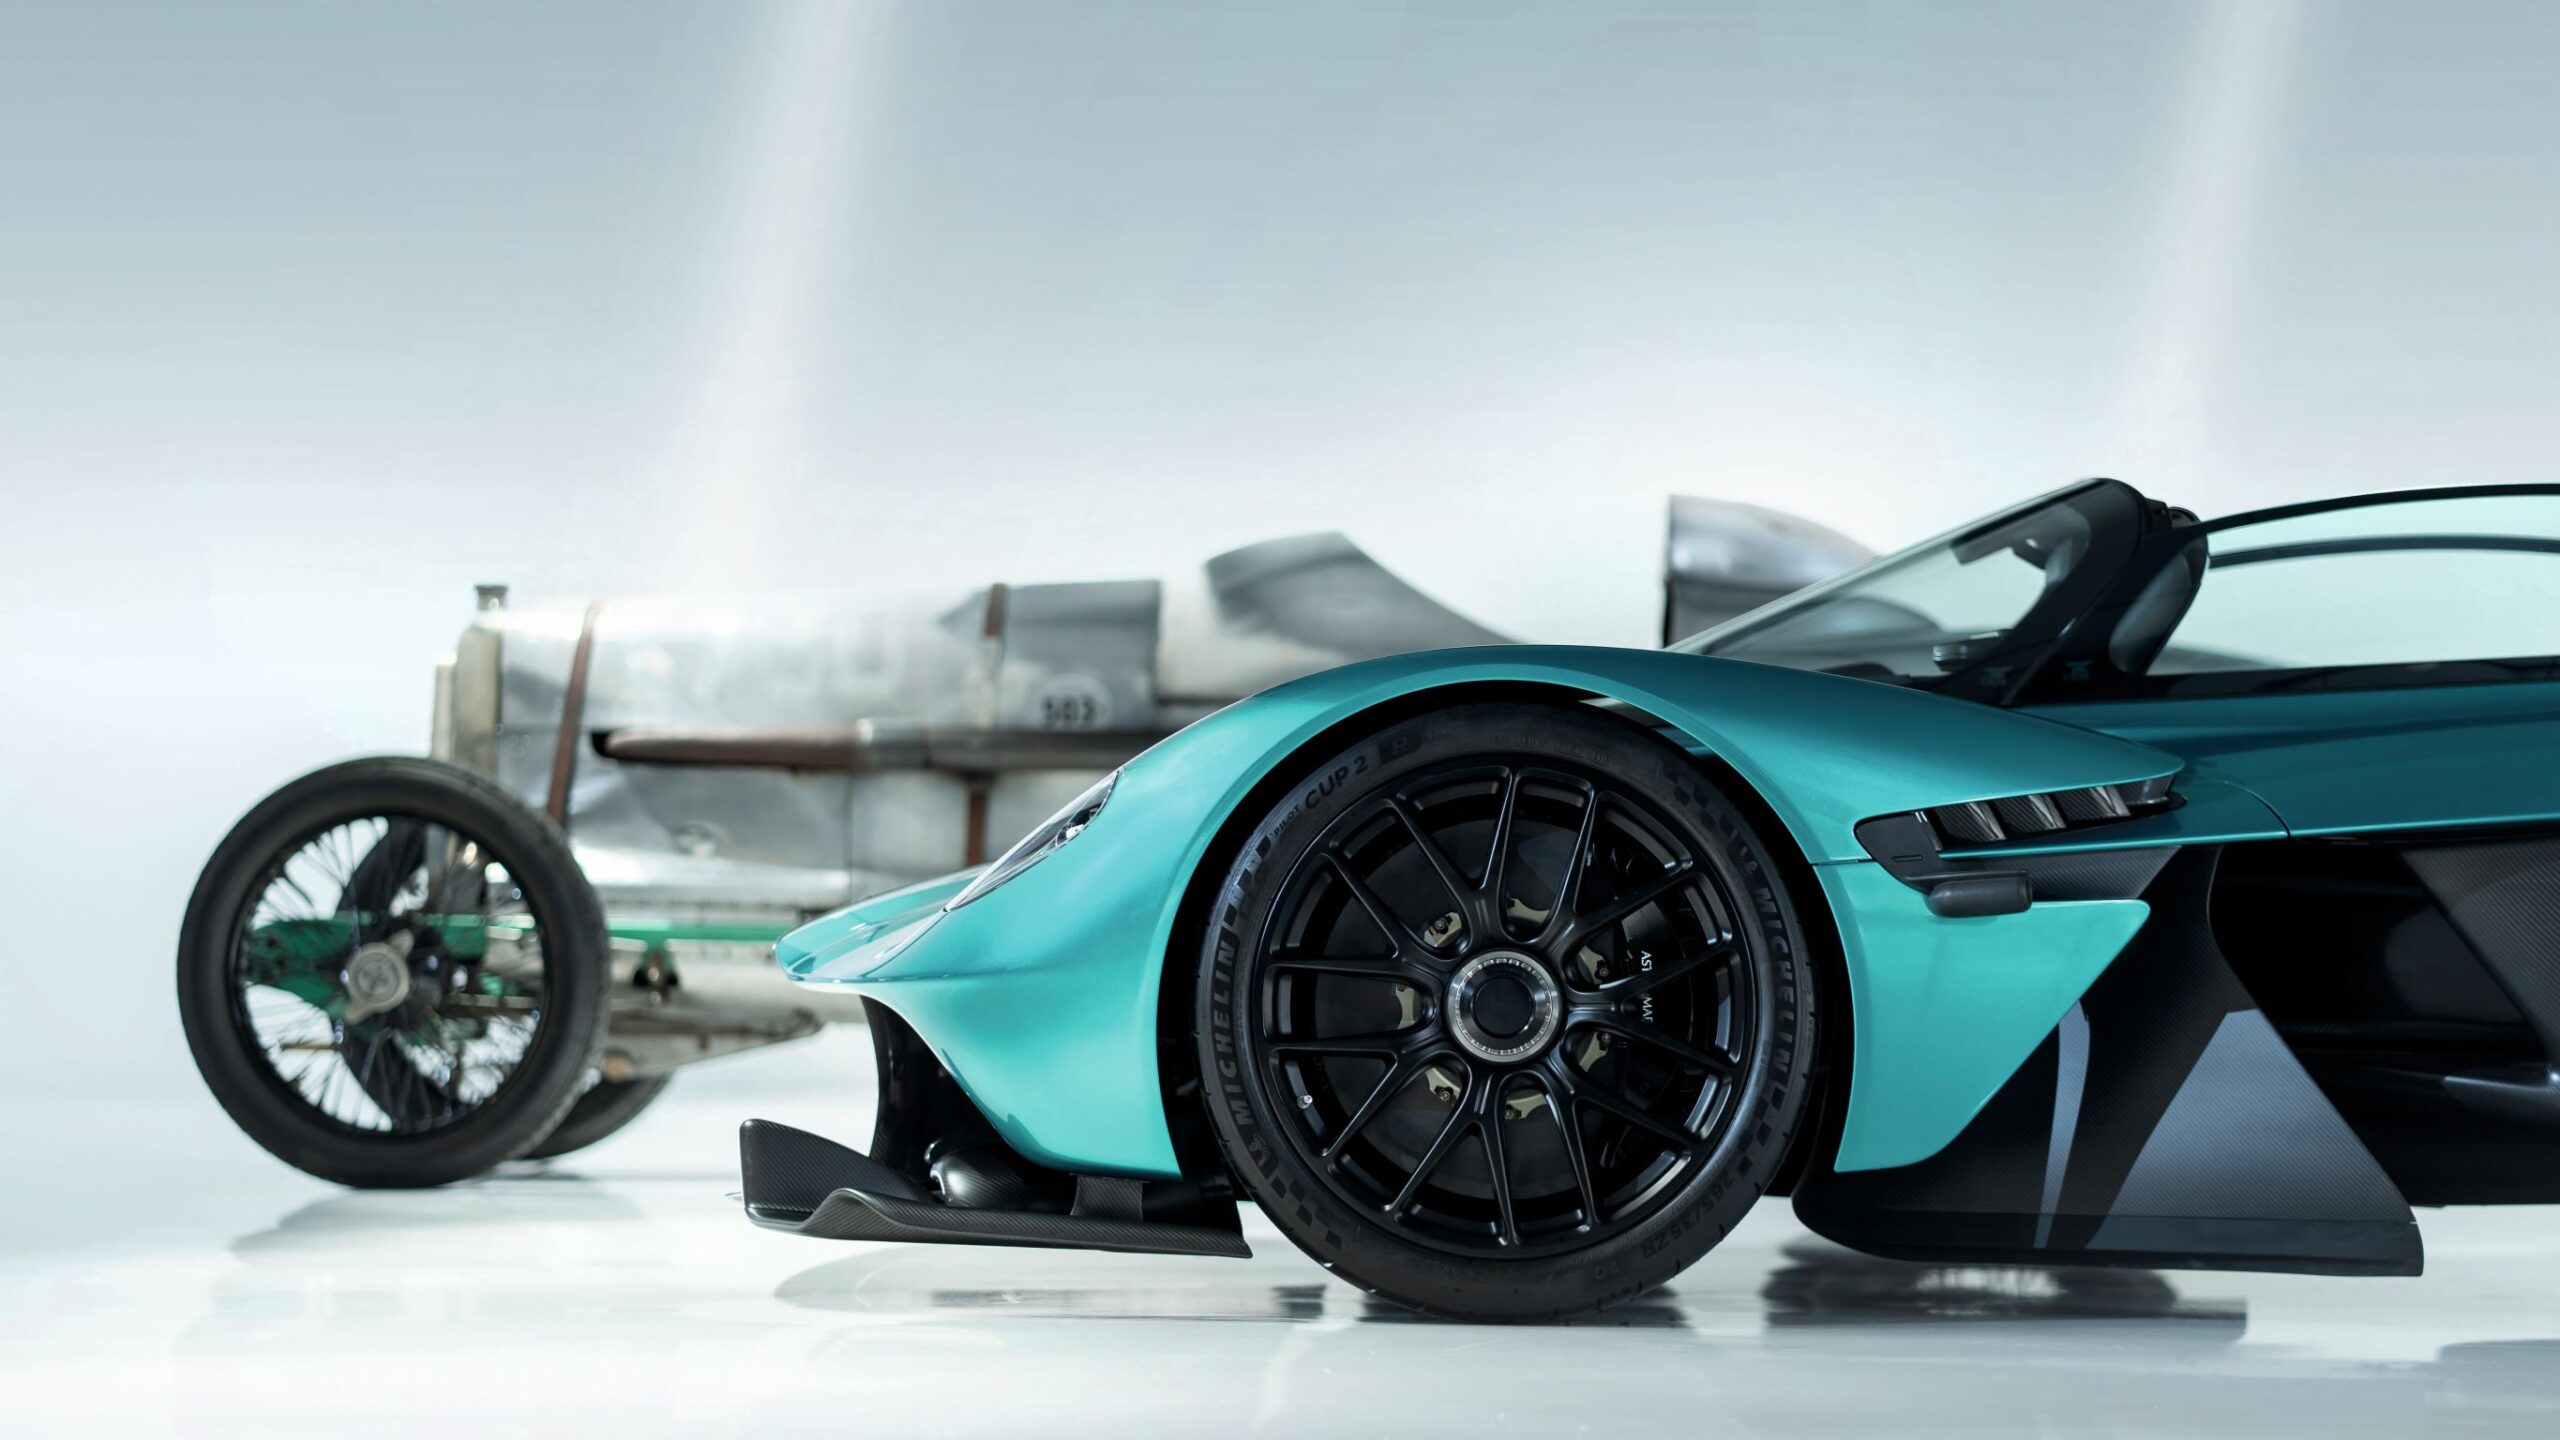 An Aston Martin Valkyrie in the foreground with an Aston Martin racer Razor Blade in the background.